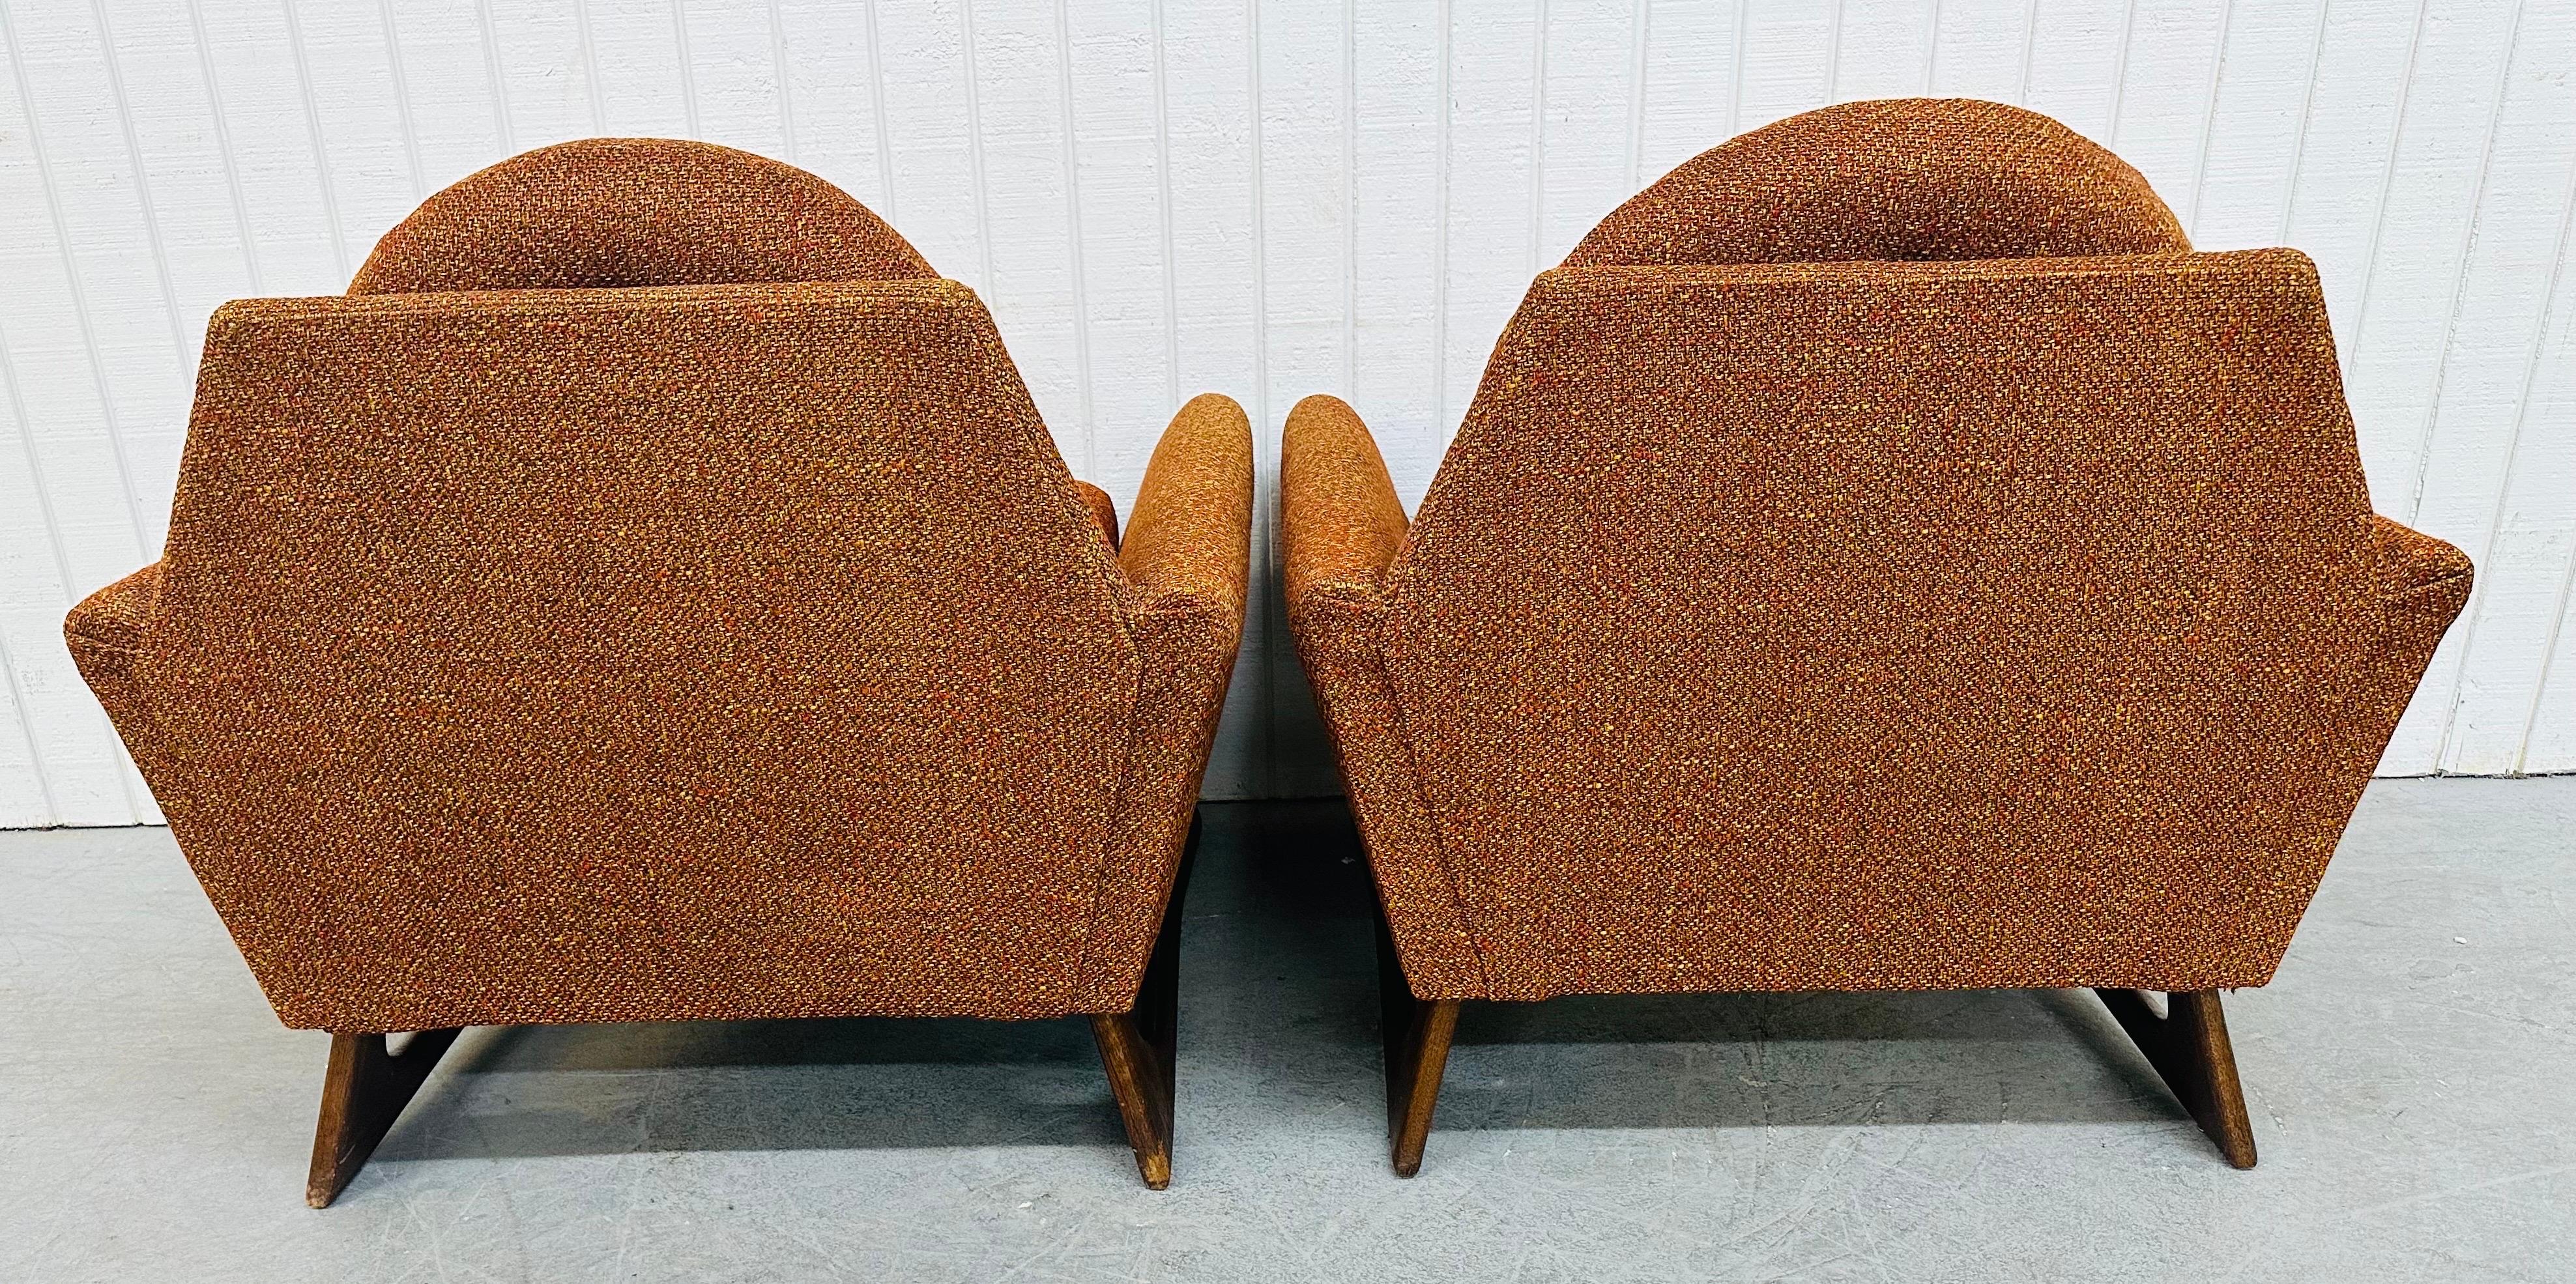 Upholstery Mid-Century Modern Adrian Pearsall Style Burnt Orange Walnut Arm Chairs For Sale